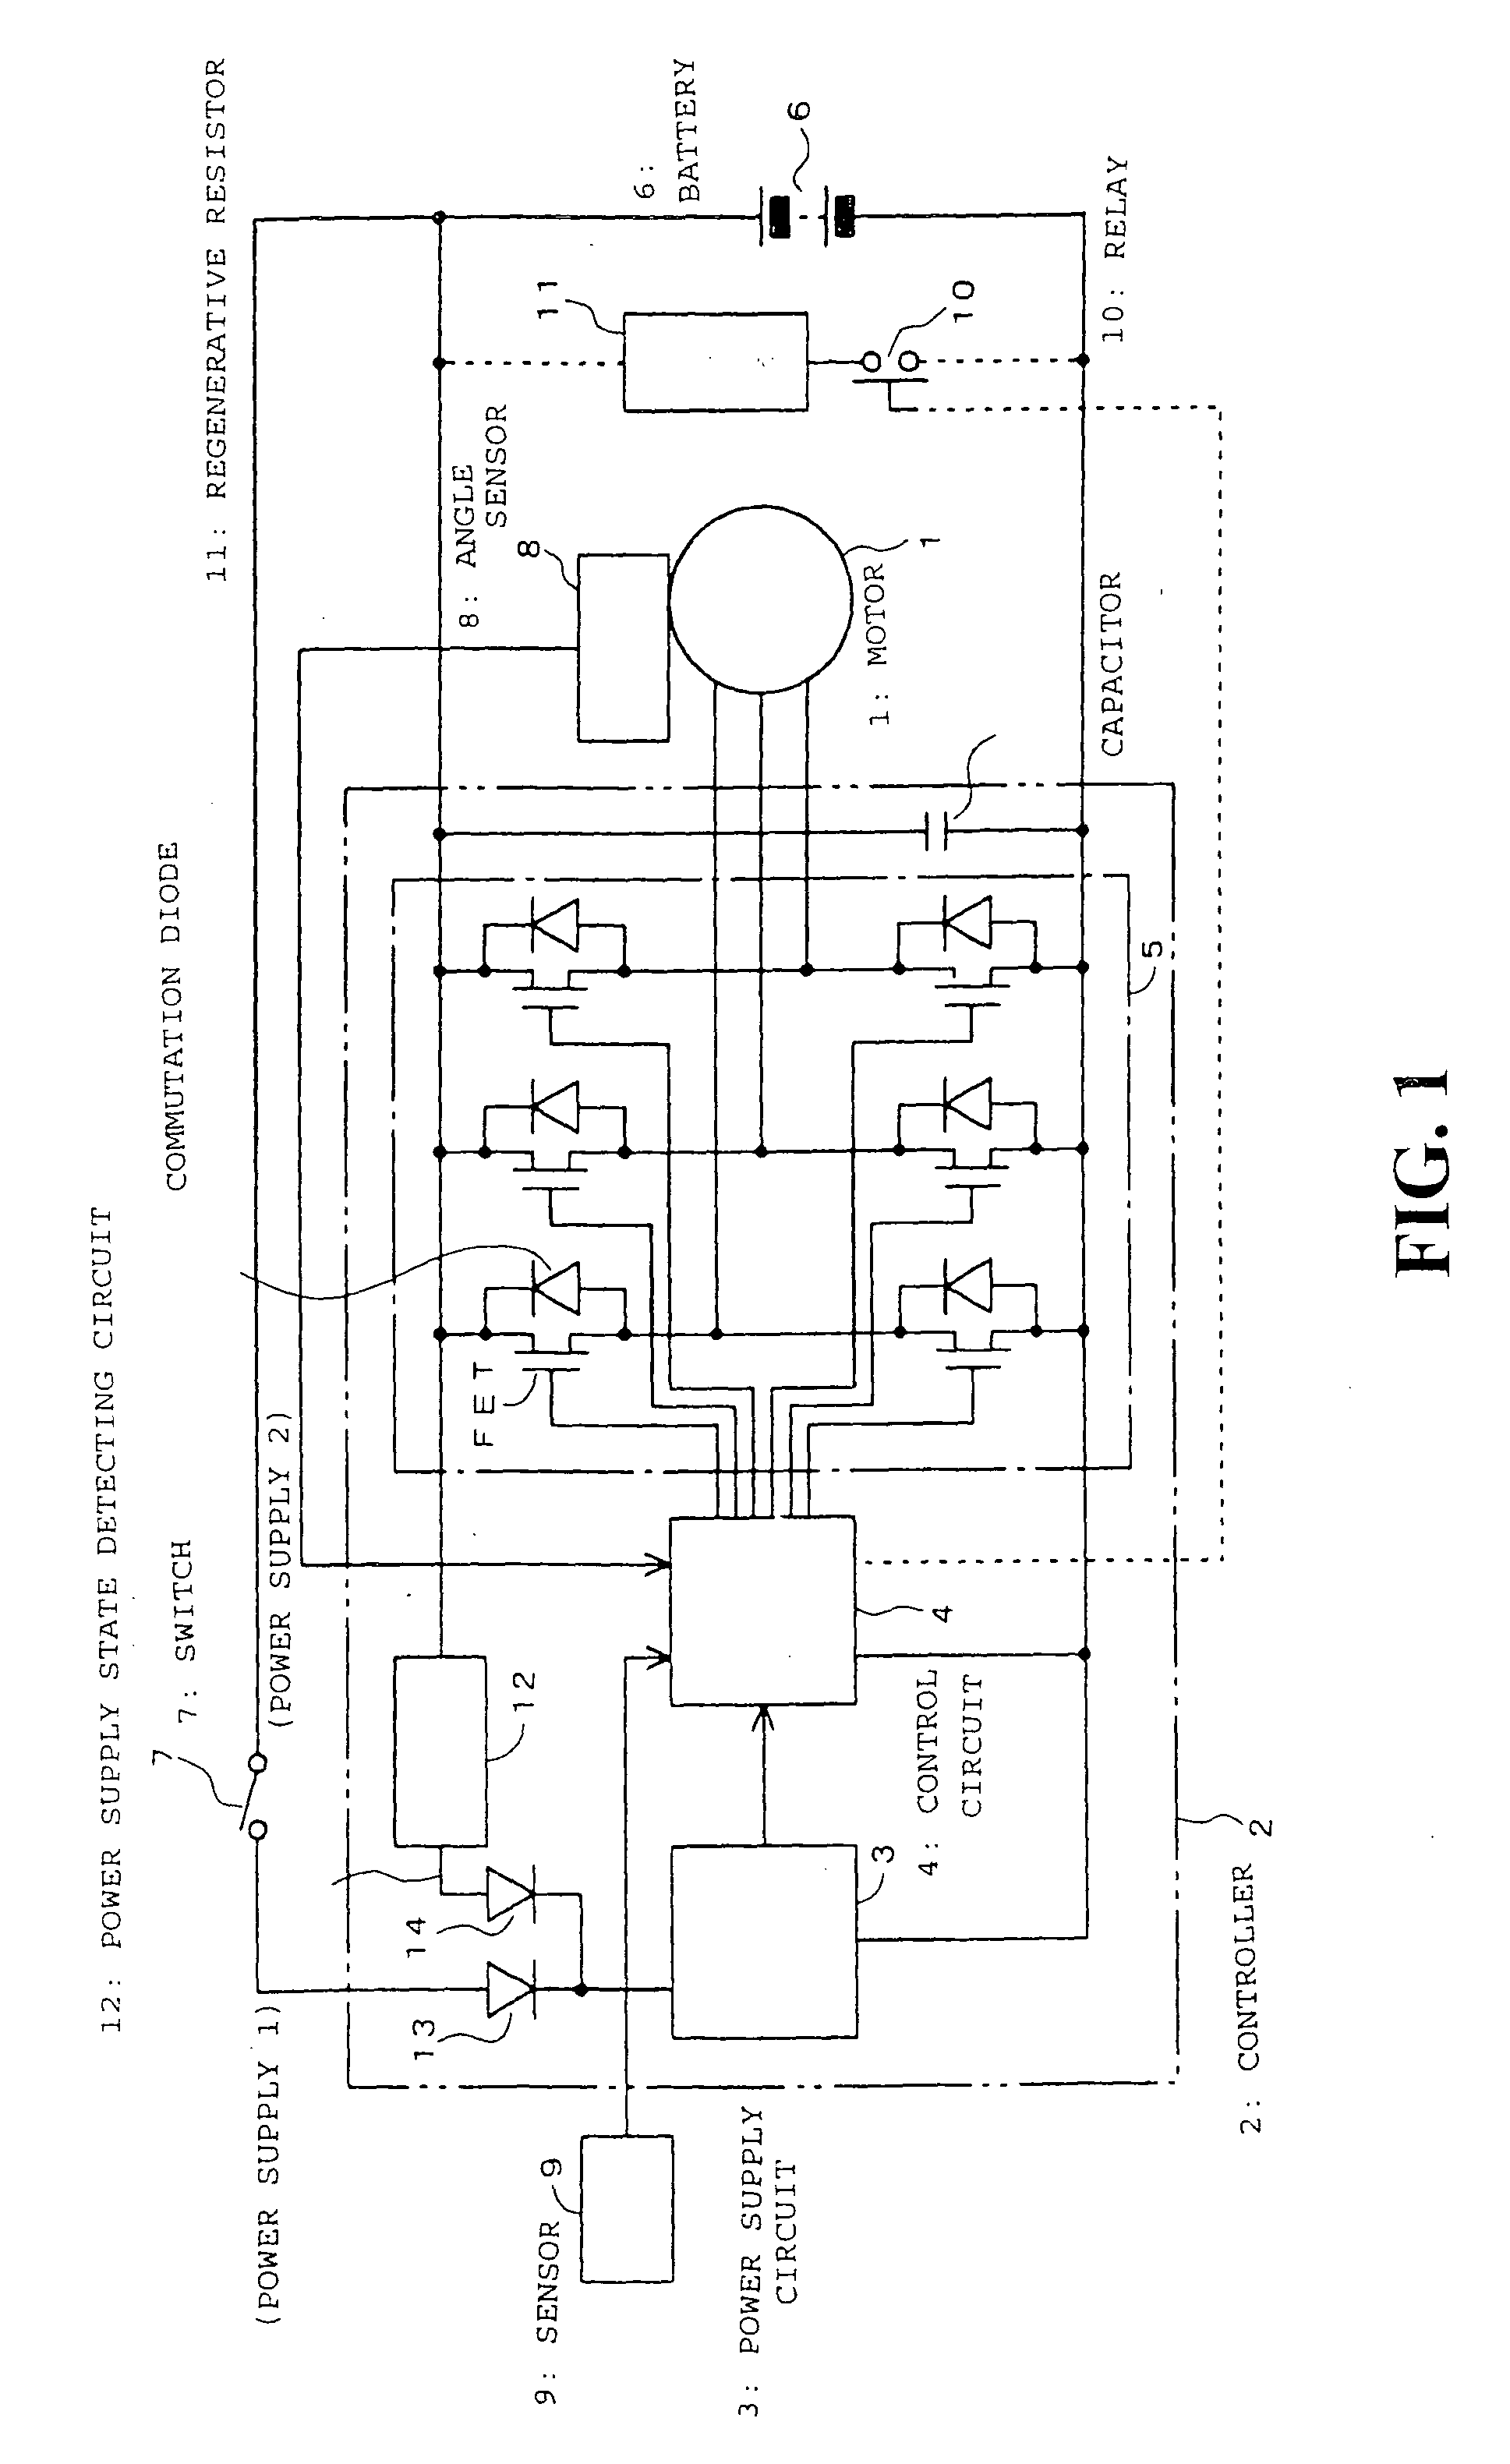 Power supply apparatus in electric vehicle